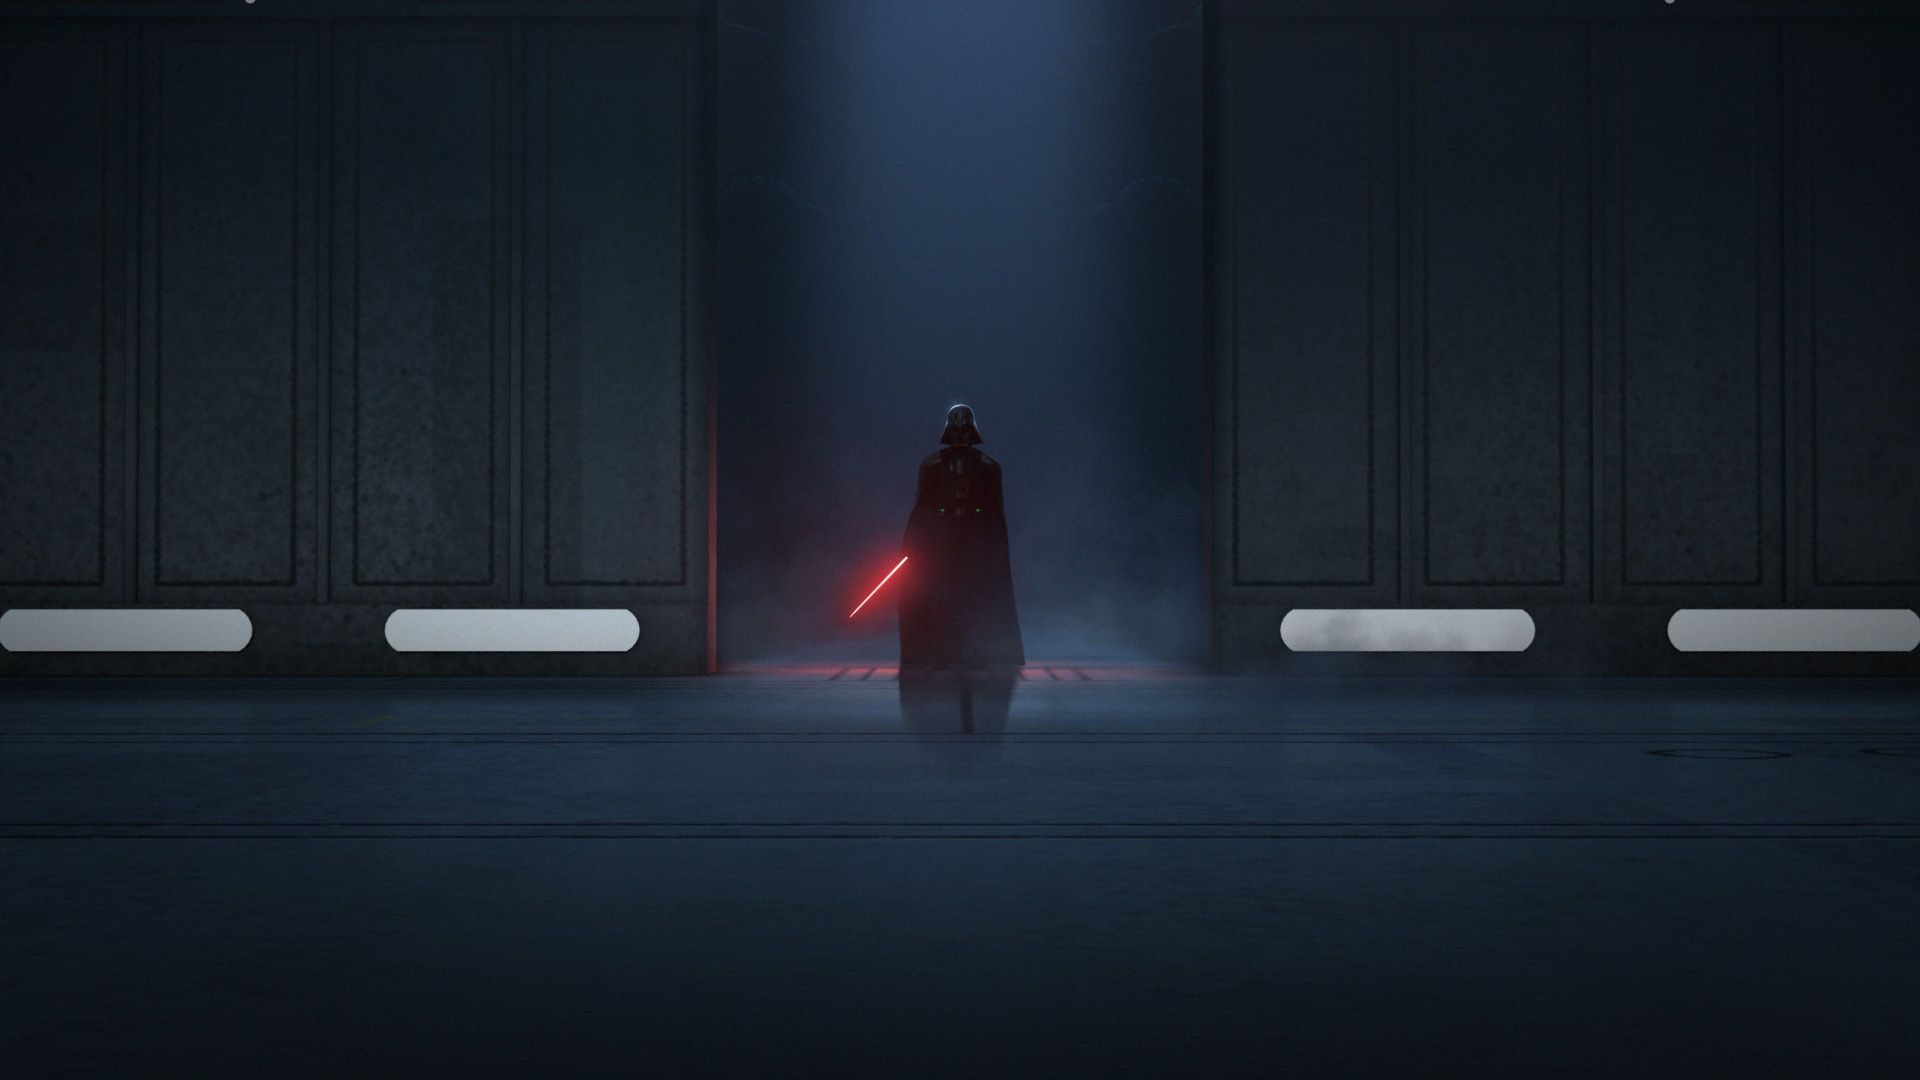 Darth Vader at a distance with his red lightsaber ignited in Star Wars Rebels